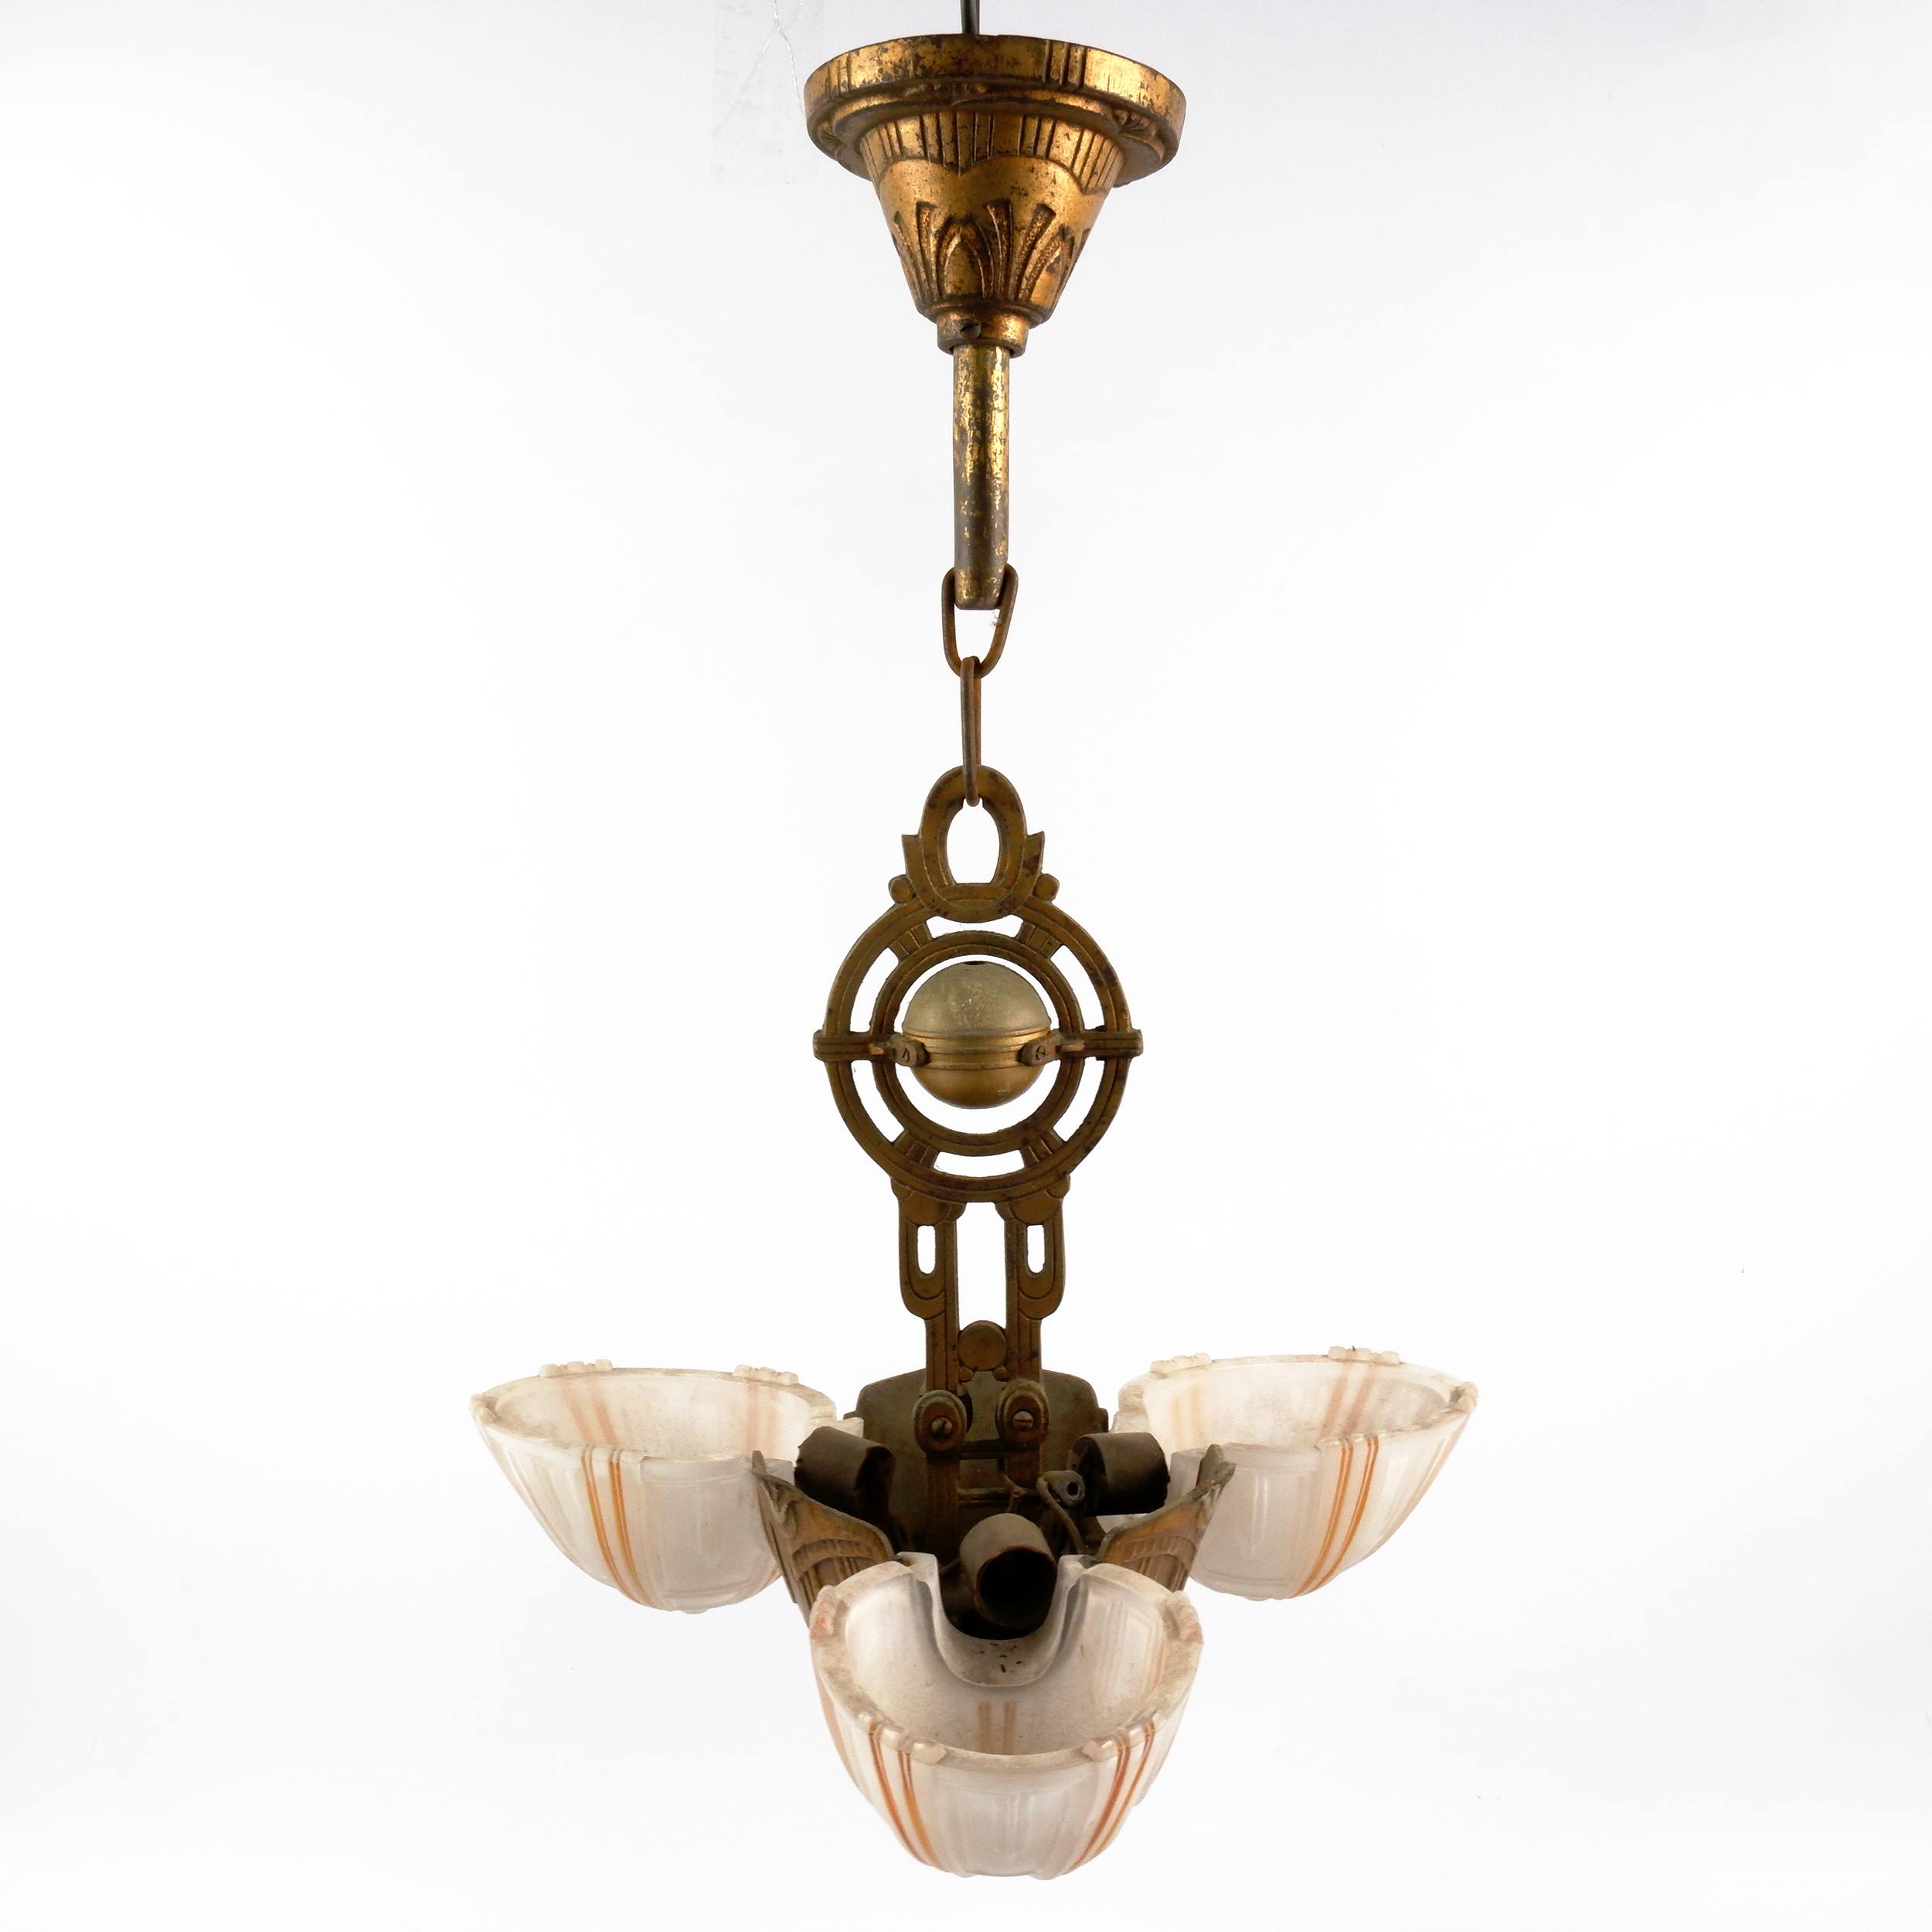 'Art Deco Patinated Metal Pendant Light Fitting with Three Slipper Opaque Glass Shades, Circa 1930s'